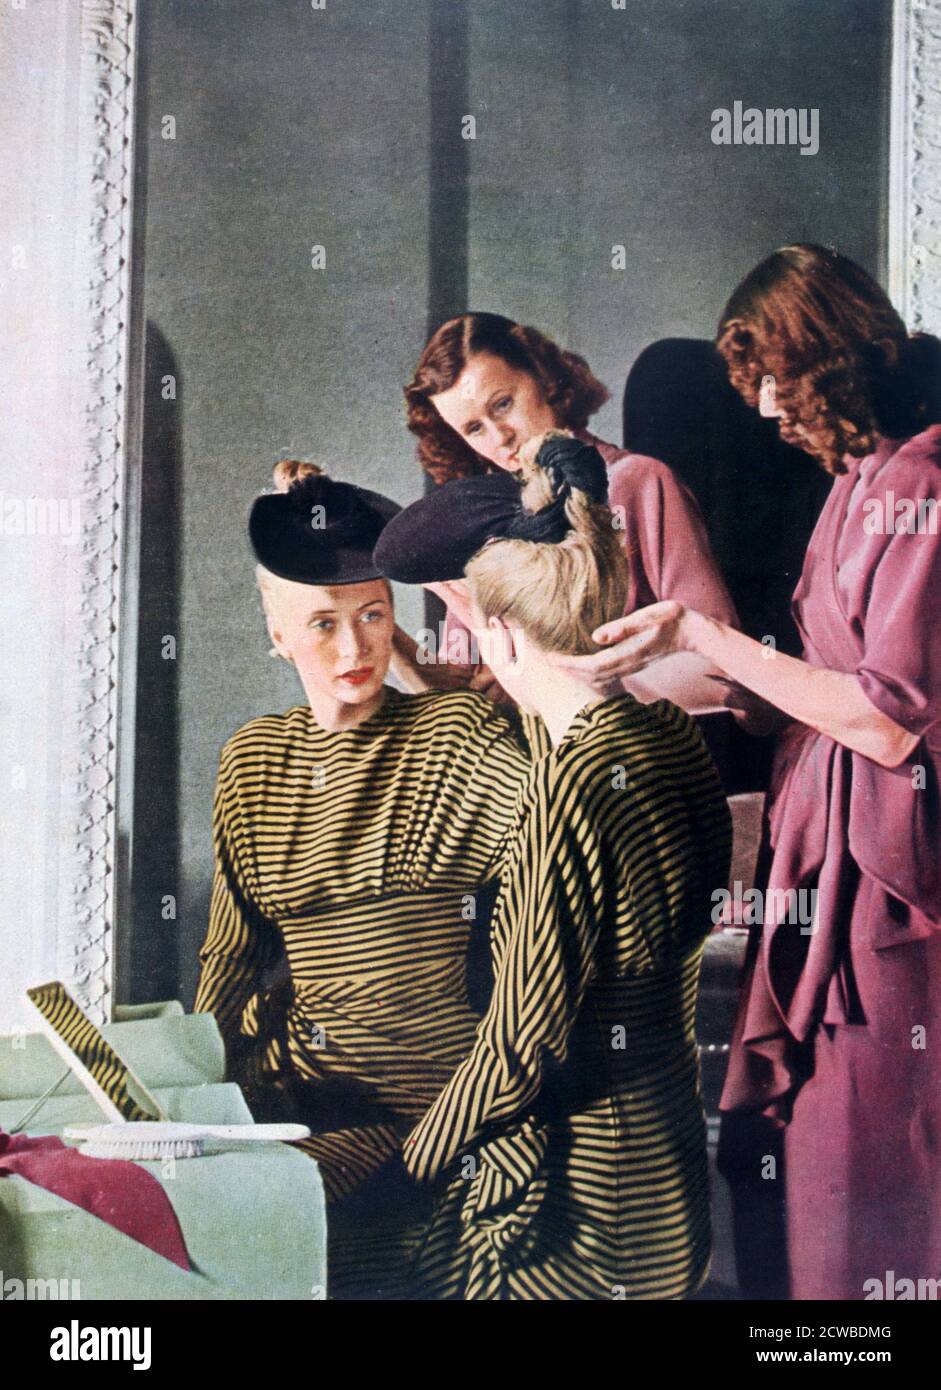 German women's fashion, 1942. A print from Signal, March 1942. Signal was a magazine published by the German Third Reich from 1940 through 1945. The artist is unknown. Stock Photo